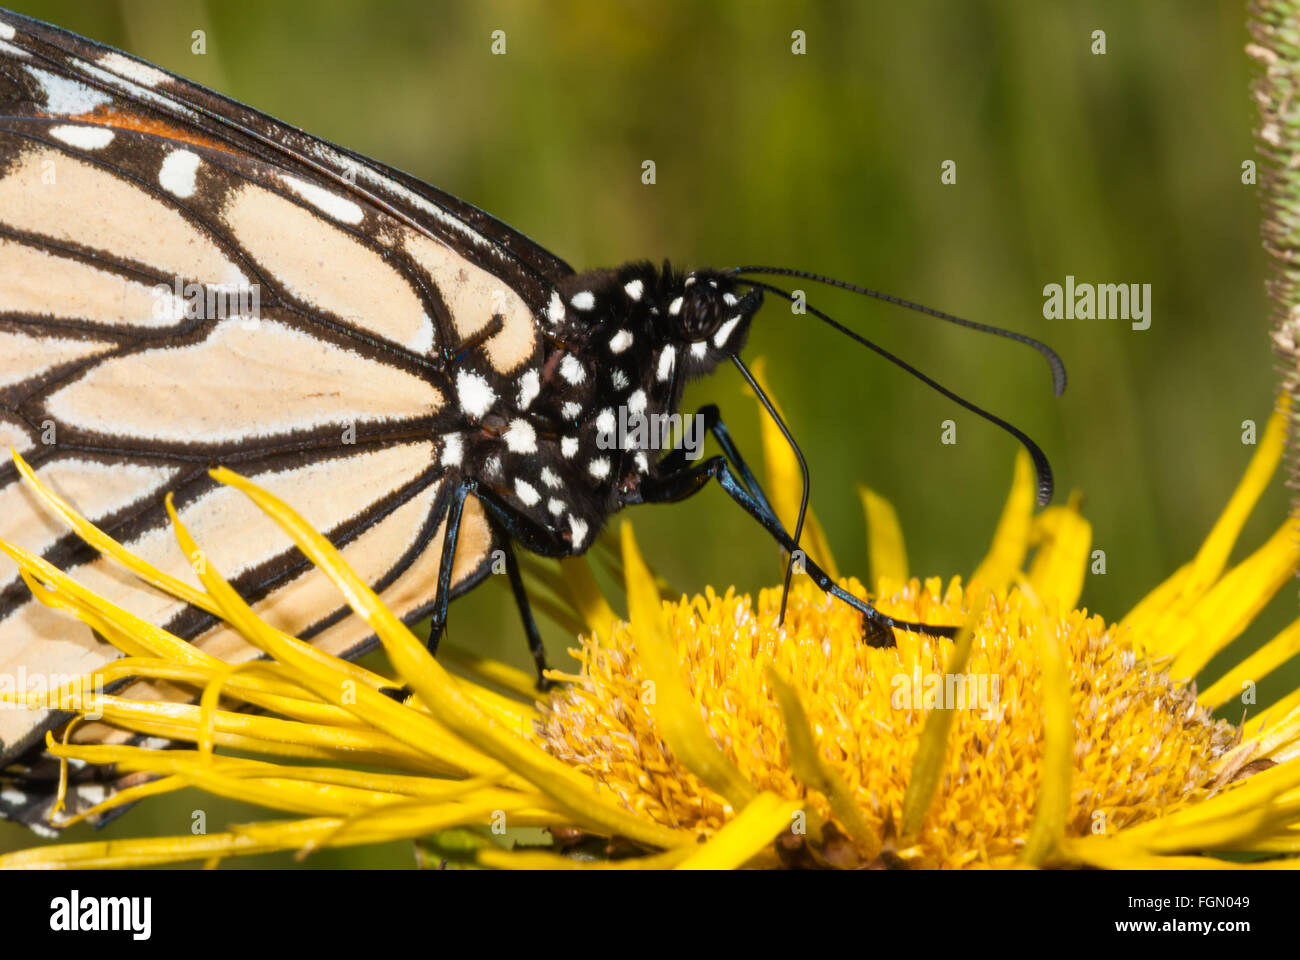 Monarch butterfly, Danaus plexippus, feeding from an elecampane flower, Inula helenium, in the Parrots Bay Conservation Area. Stock Photo